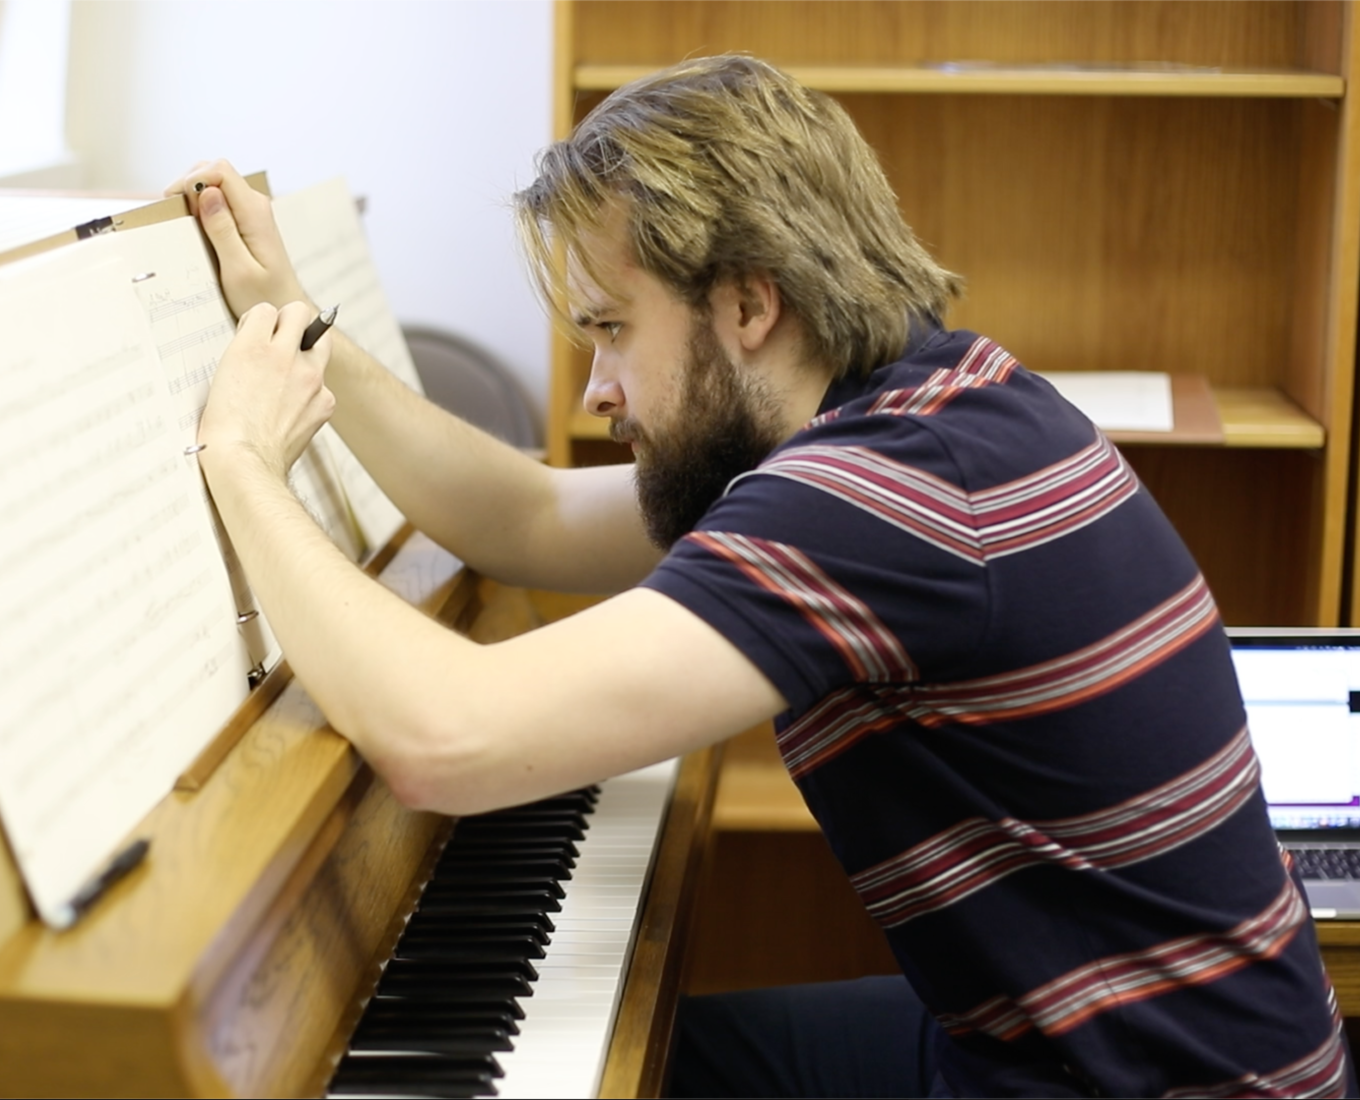 Student hunches over piano and writes sheet music